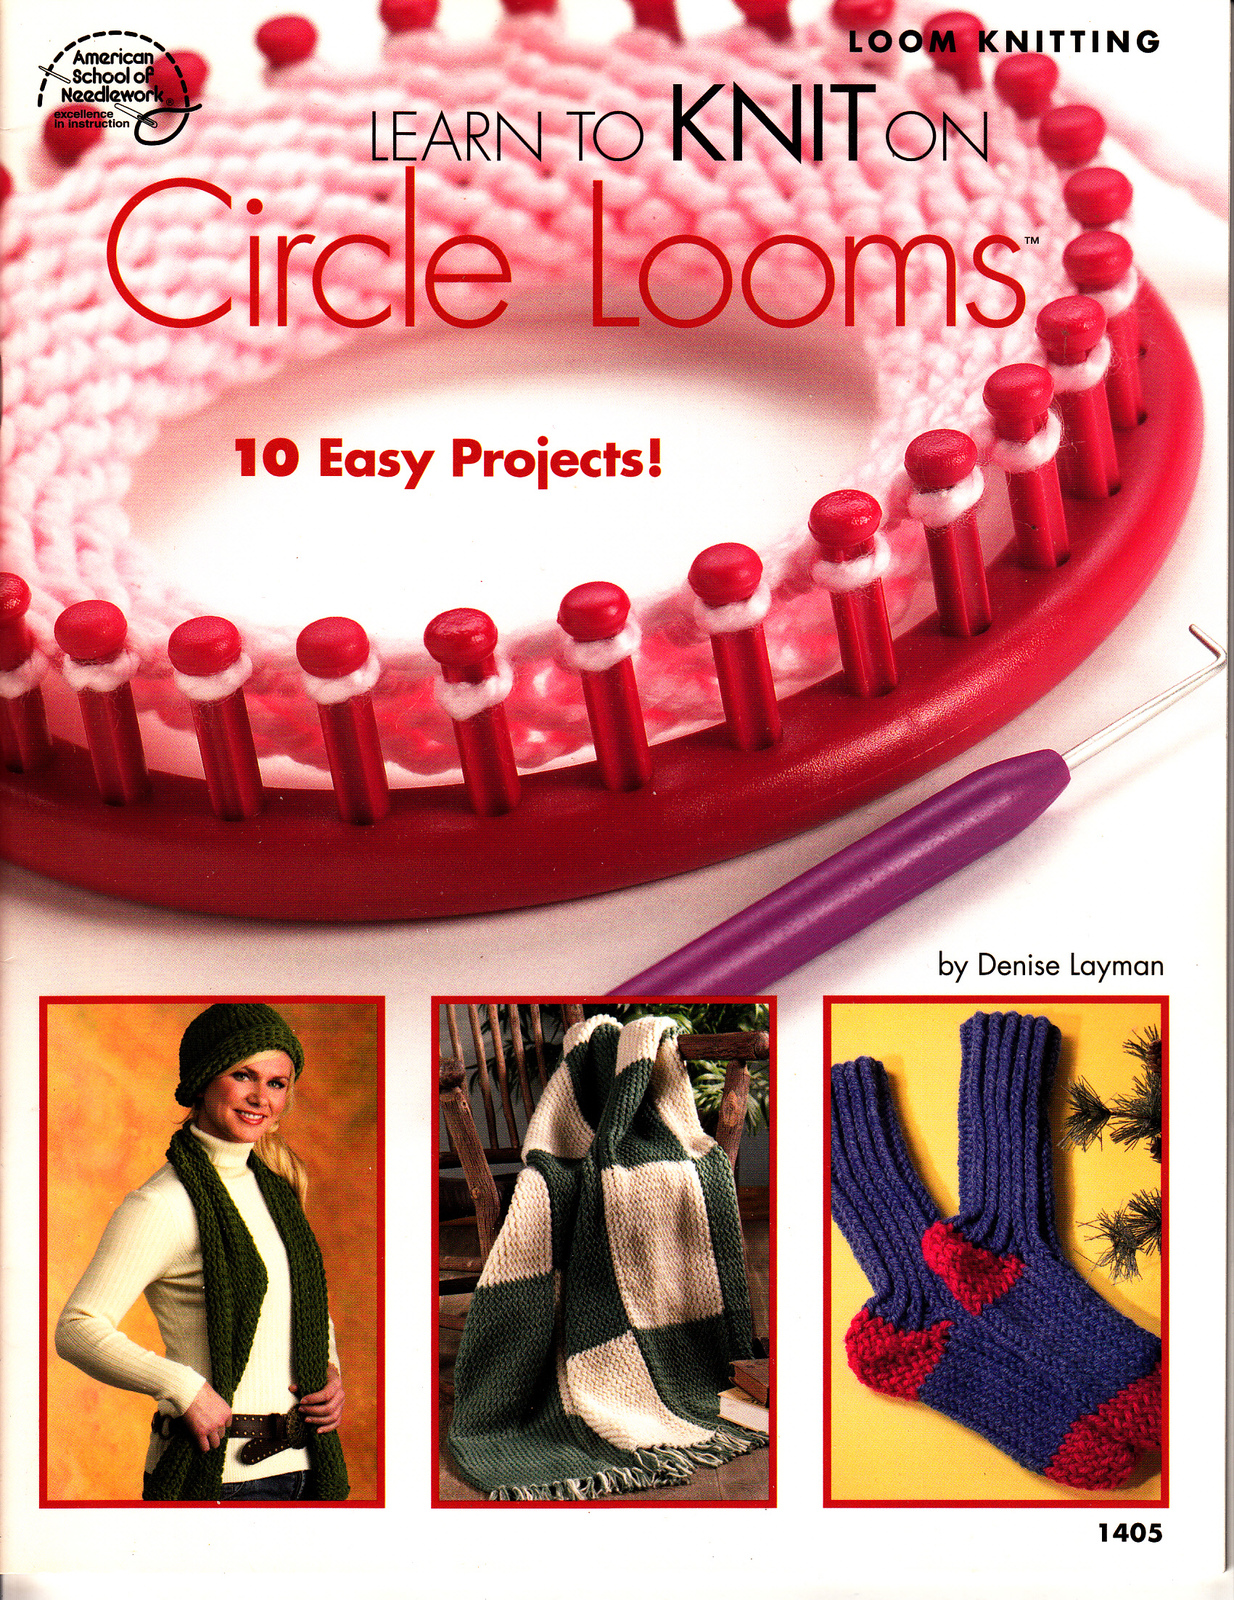 Learn to Knit on Circle Looms by Denise Layman (2006, Loom Knitting Paperback) - $5.00